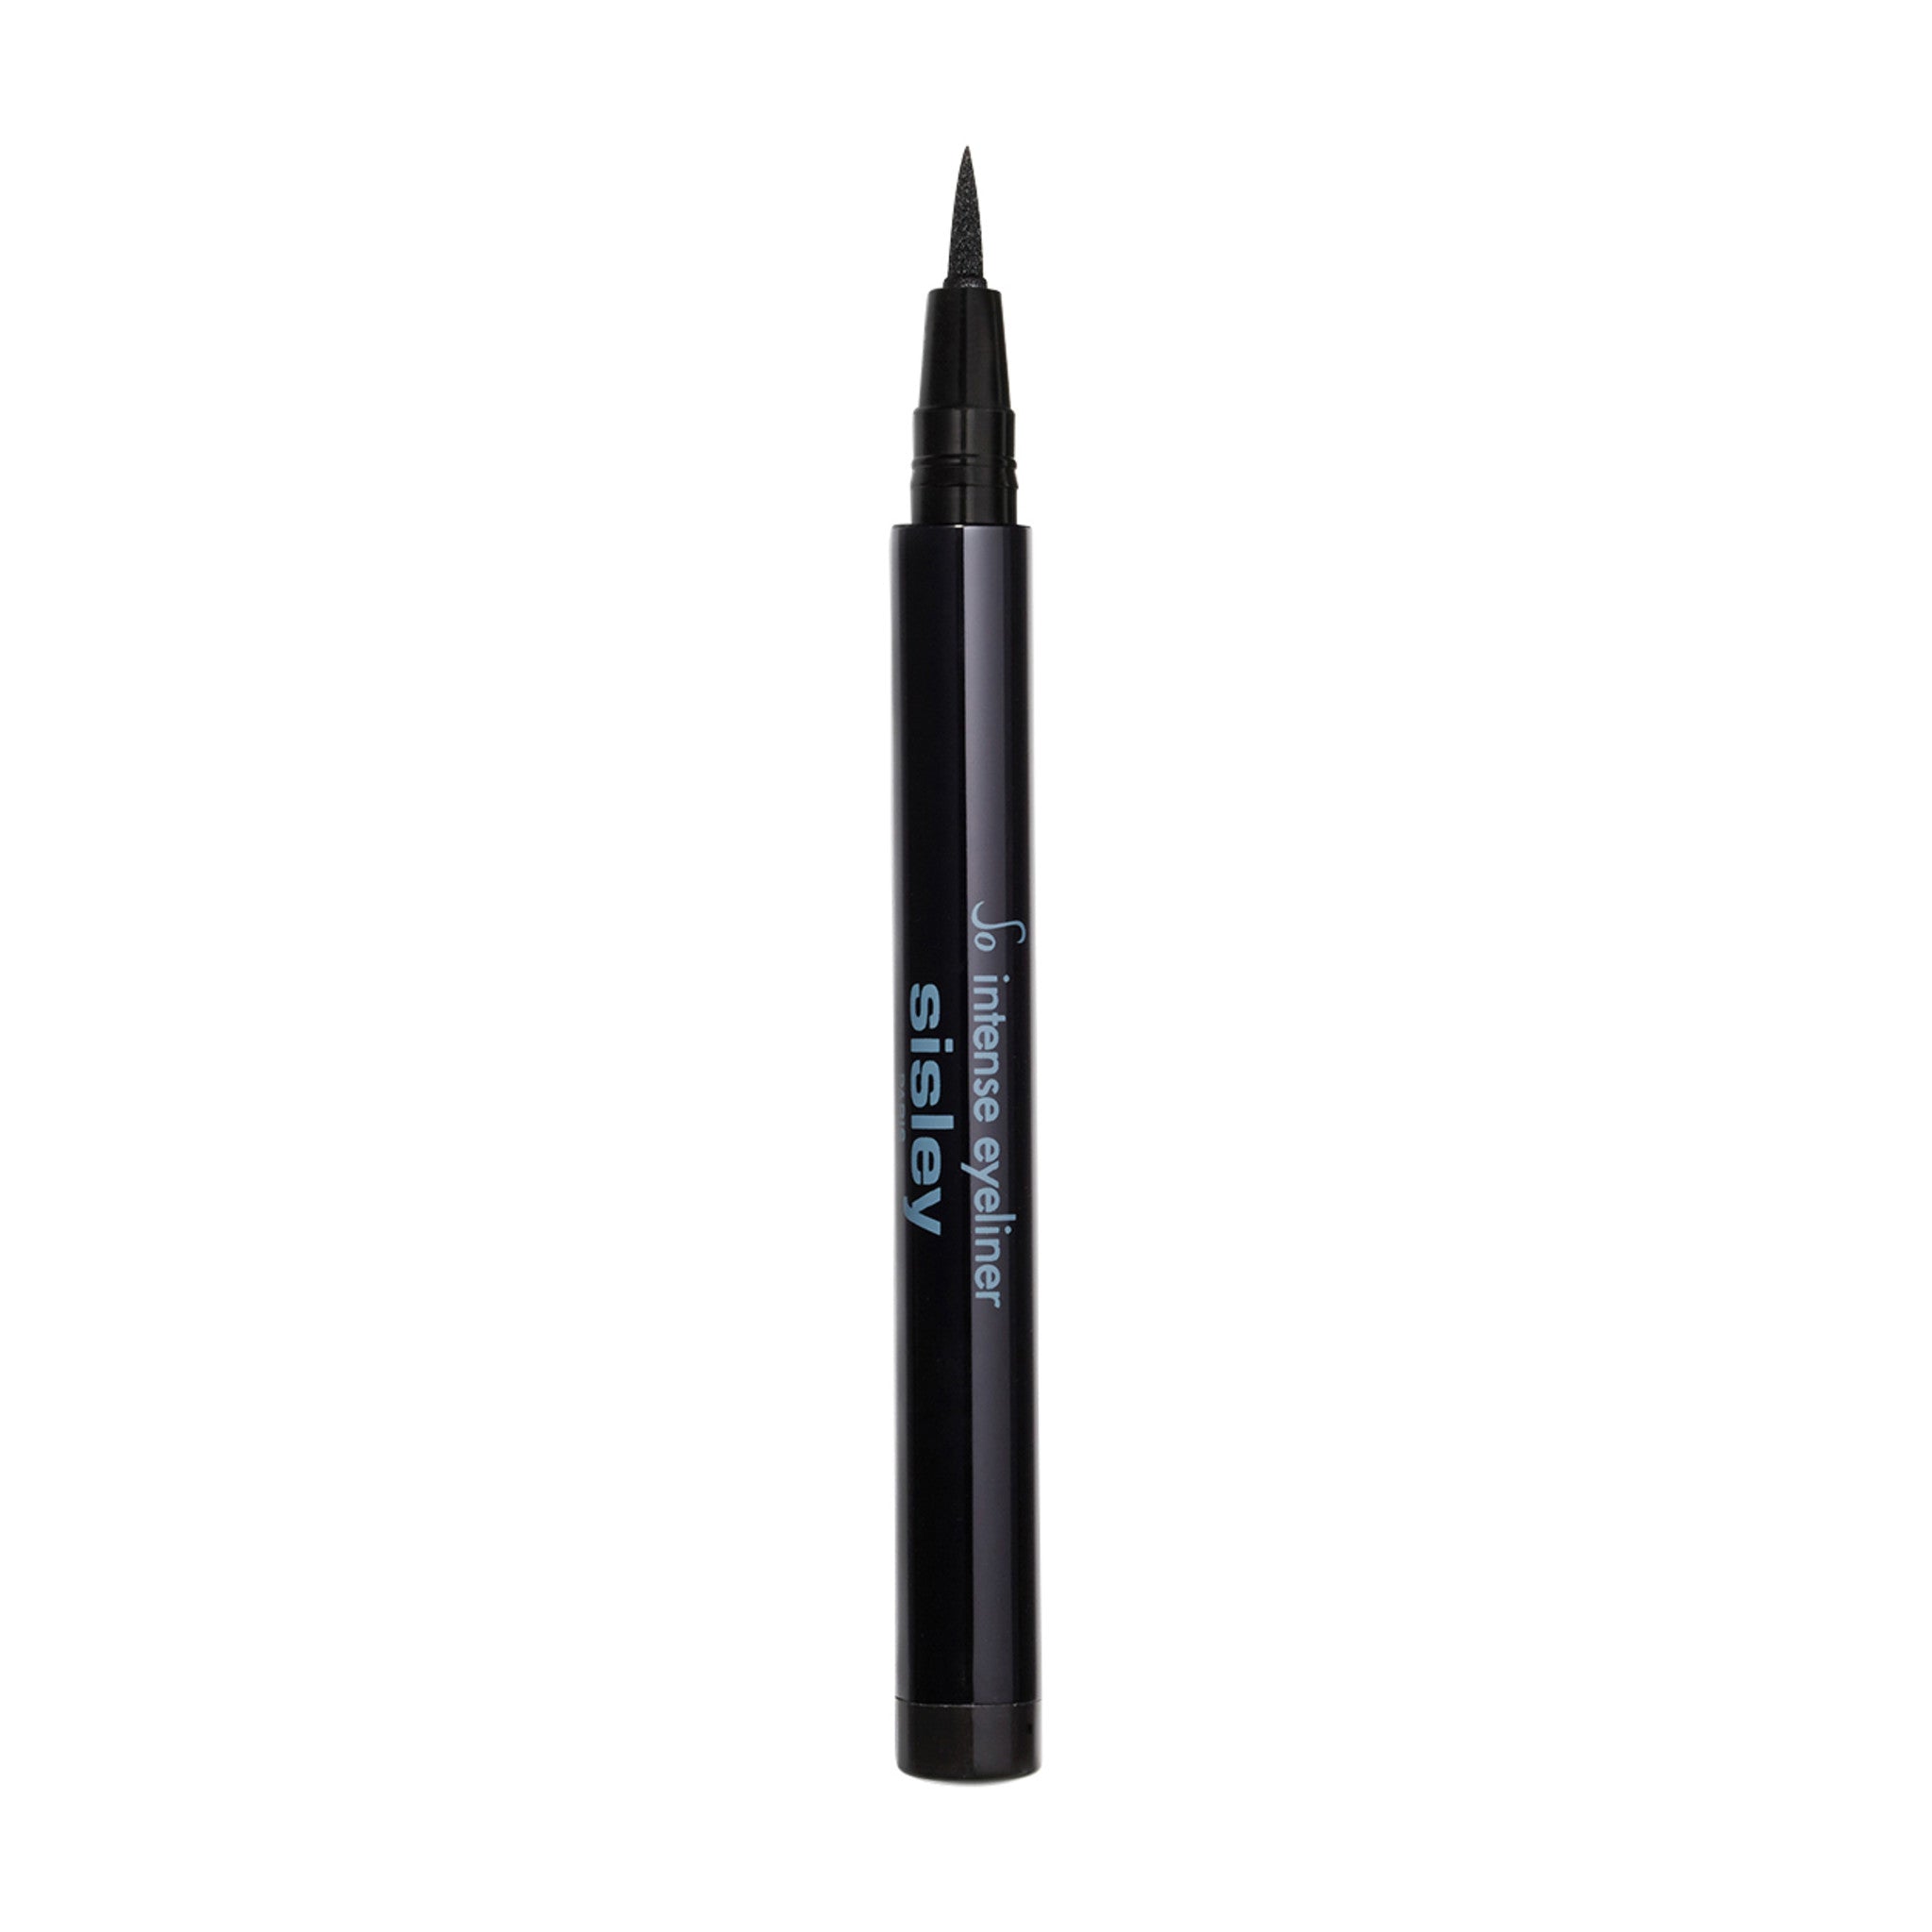 Sisley-Paris So Intense Eyeliner main image. This product is in the color black